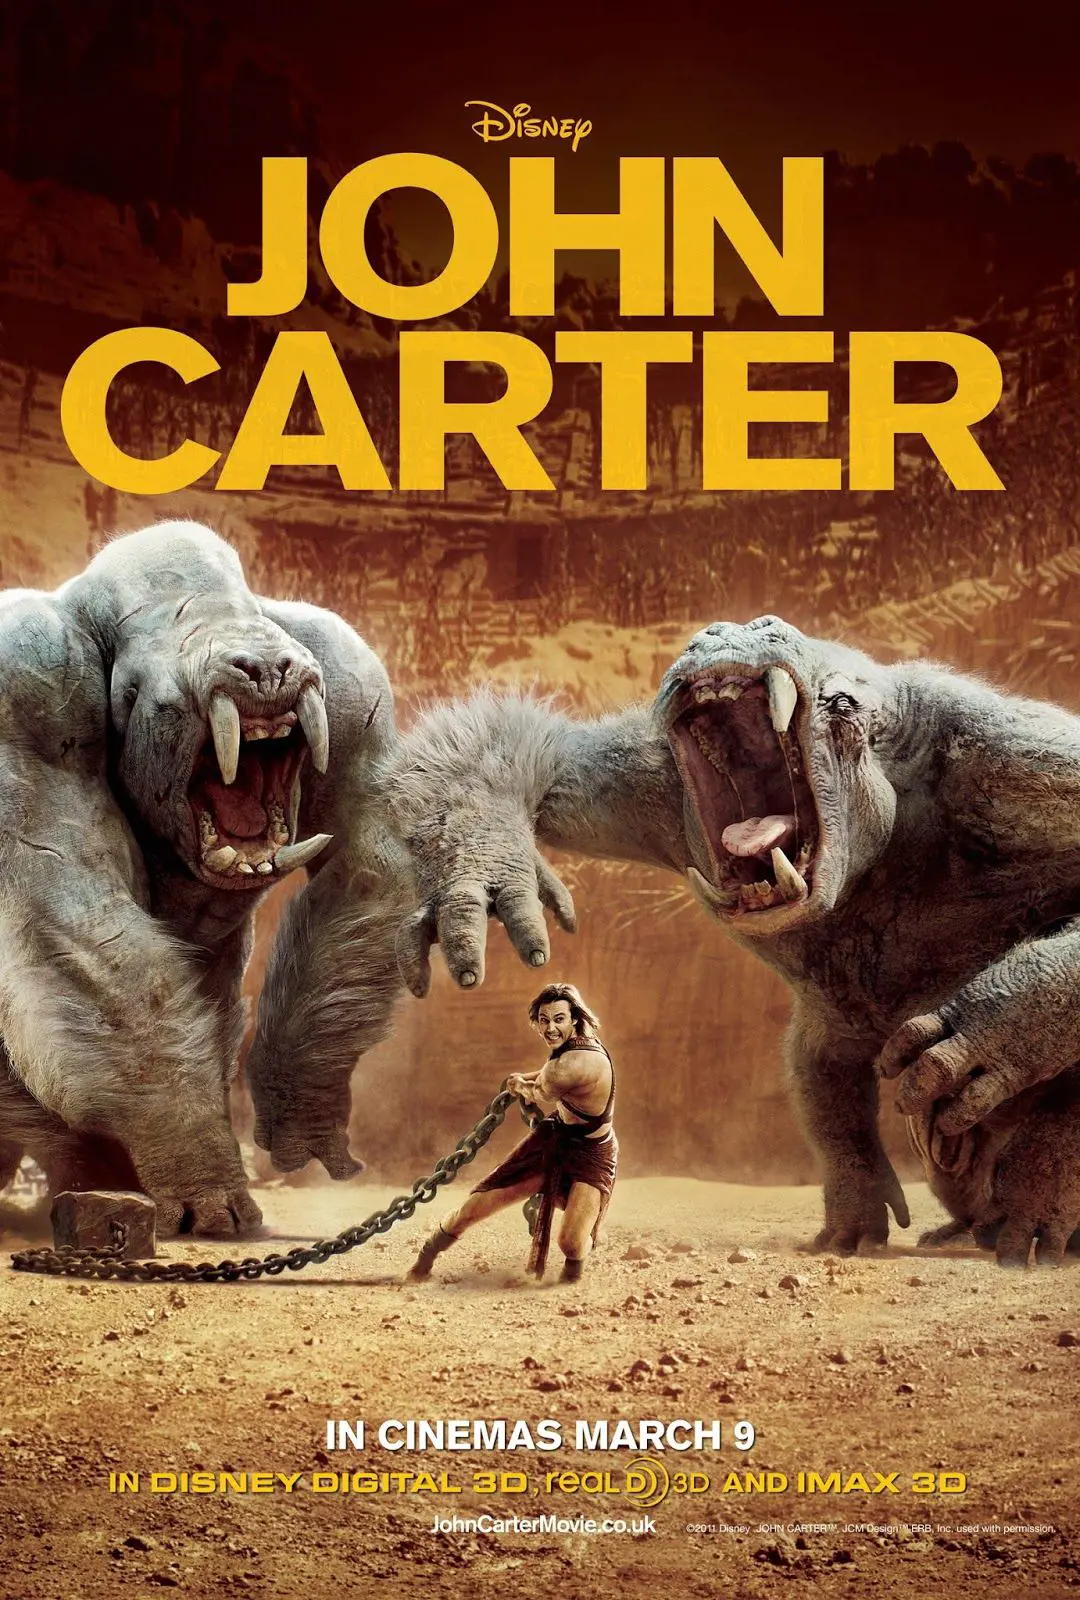 John Carter, a movie by Andrew Stanton was released 11 years ago on the 9th of March